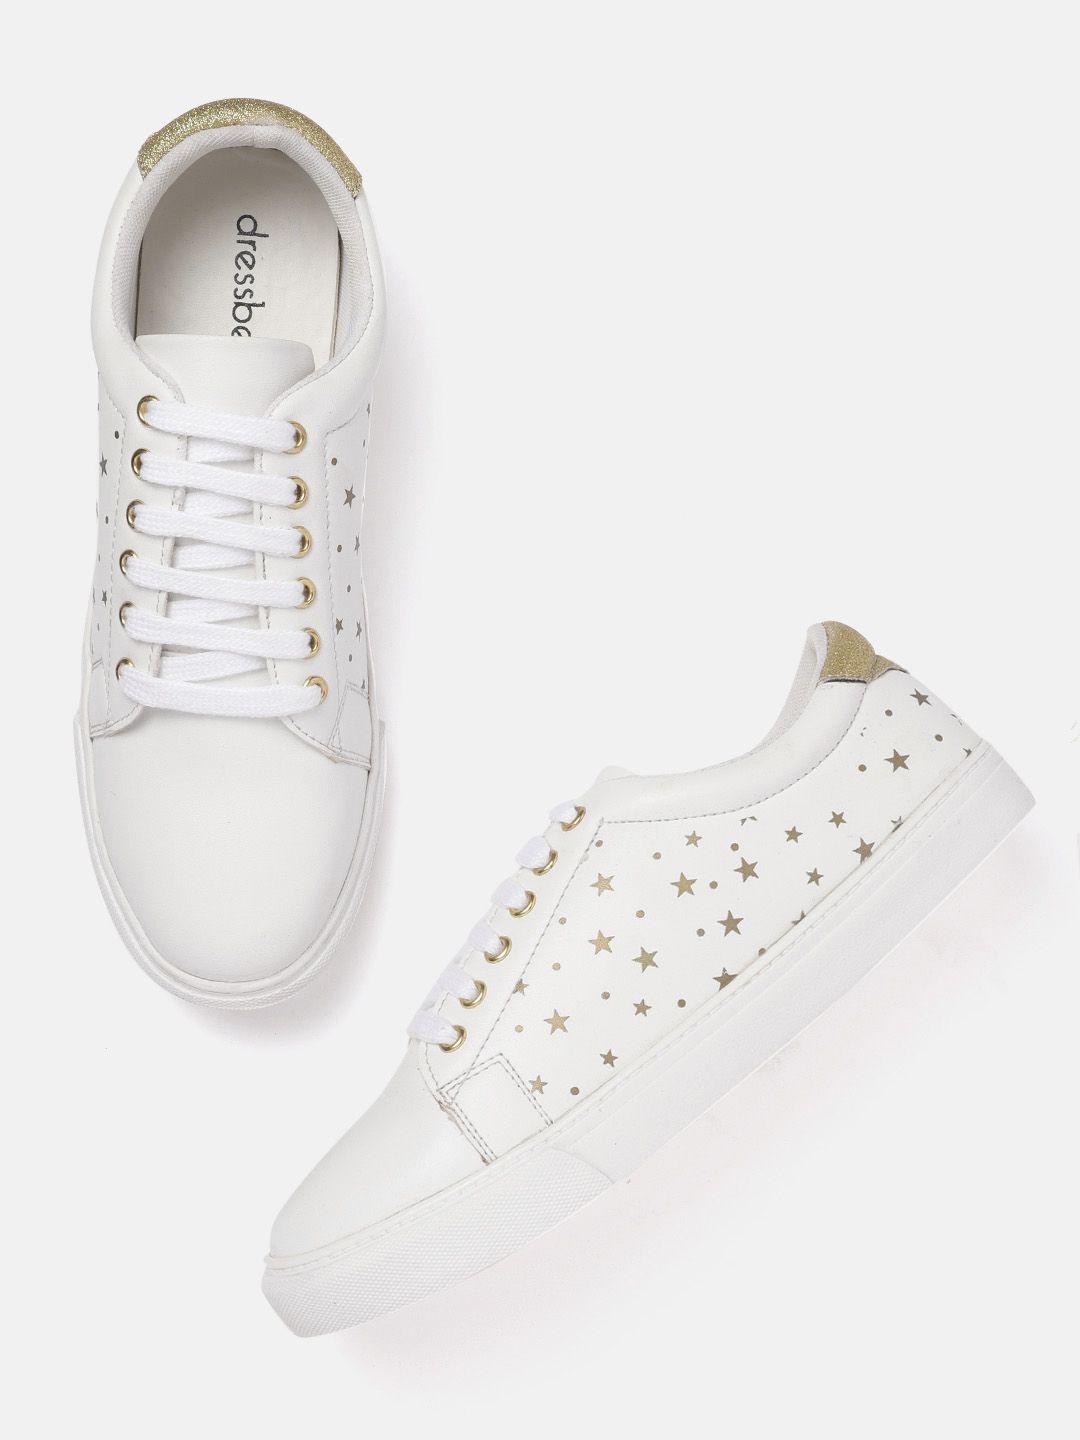 DressBerry Women White & Gold-Toned Star Printed Leather Sneakers Price in India